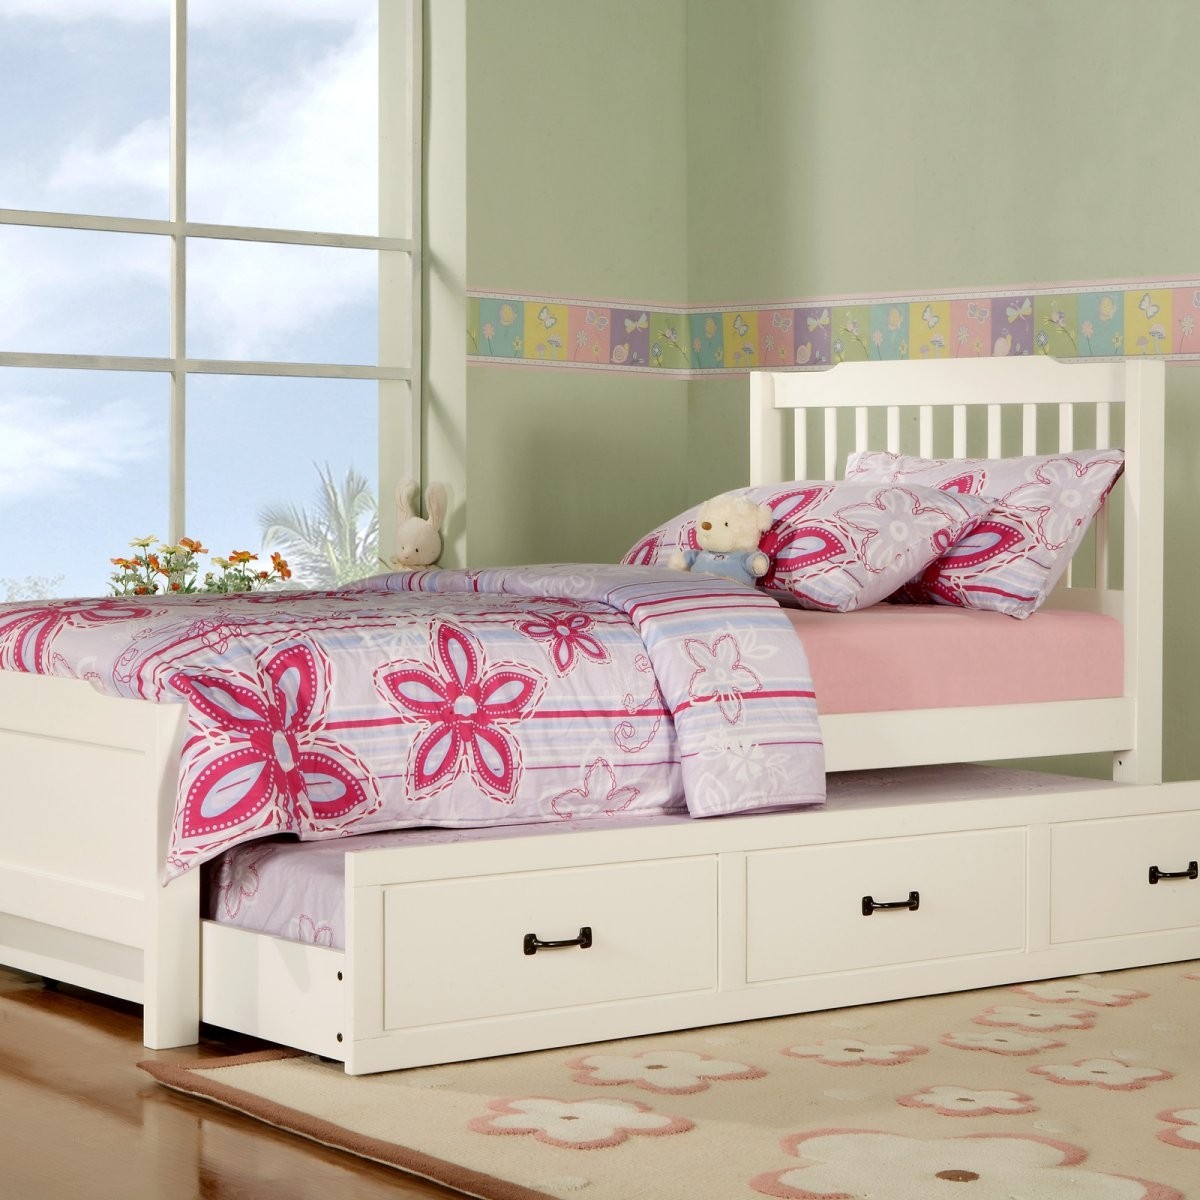 Trundle beds for children to create an accessible bedroom 6